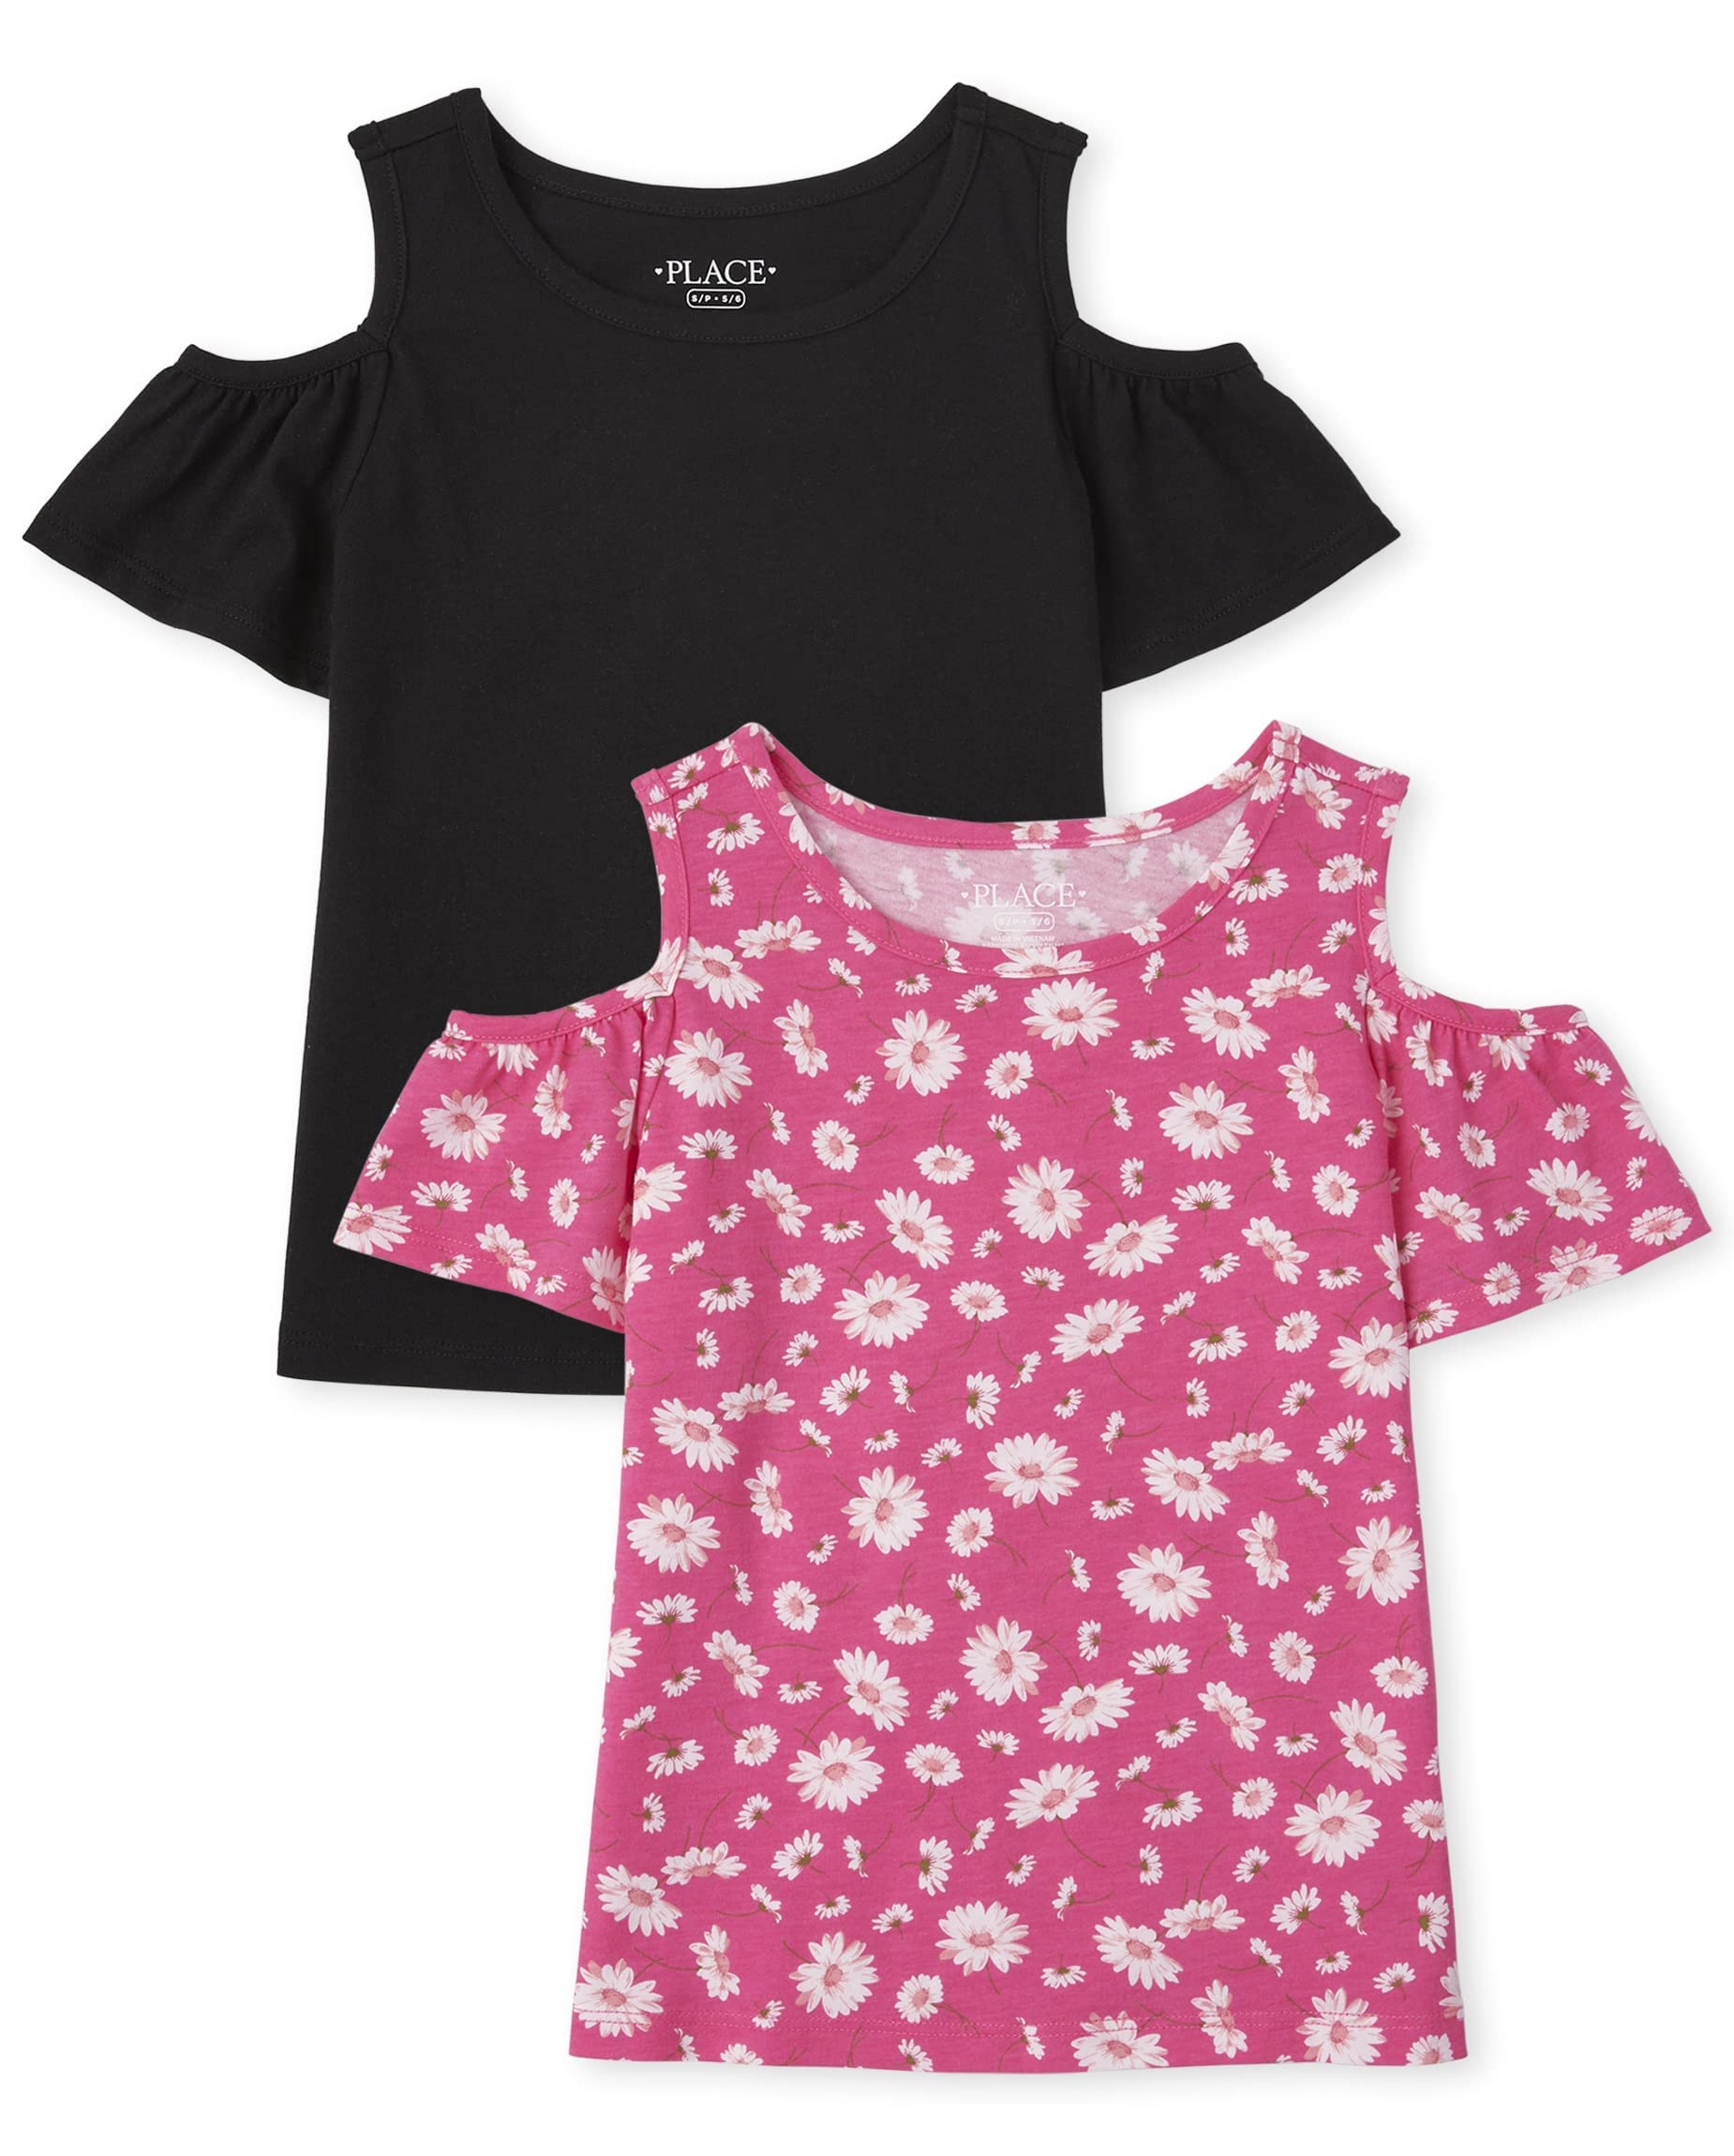 The Children's Place girls The Children's Place Short Sleeve Cold Shoulder Fashion Top Cami Shirt, Caddy Pink-2 Pack, X-Small US